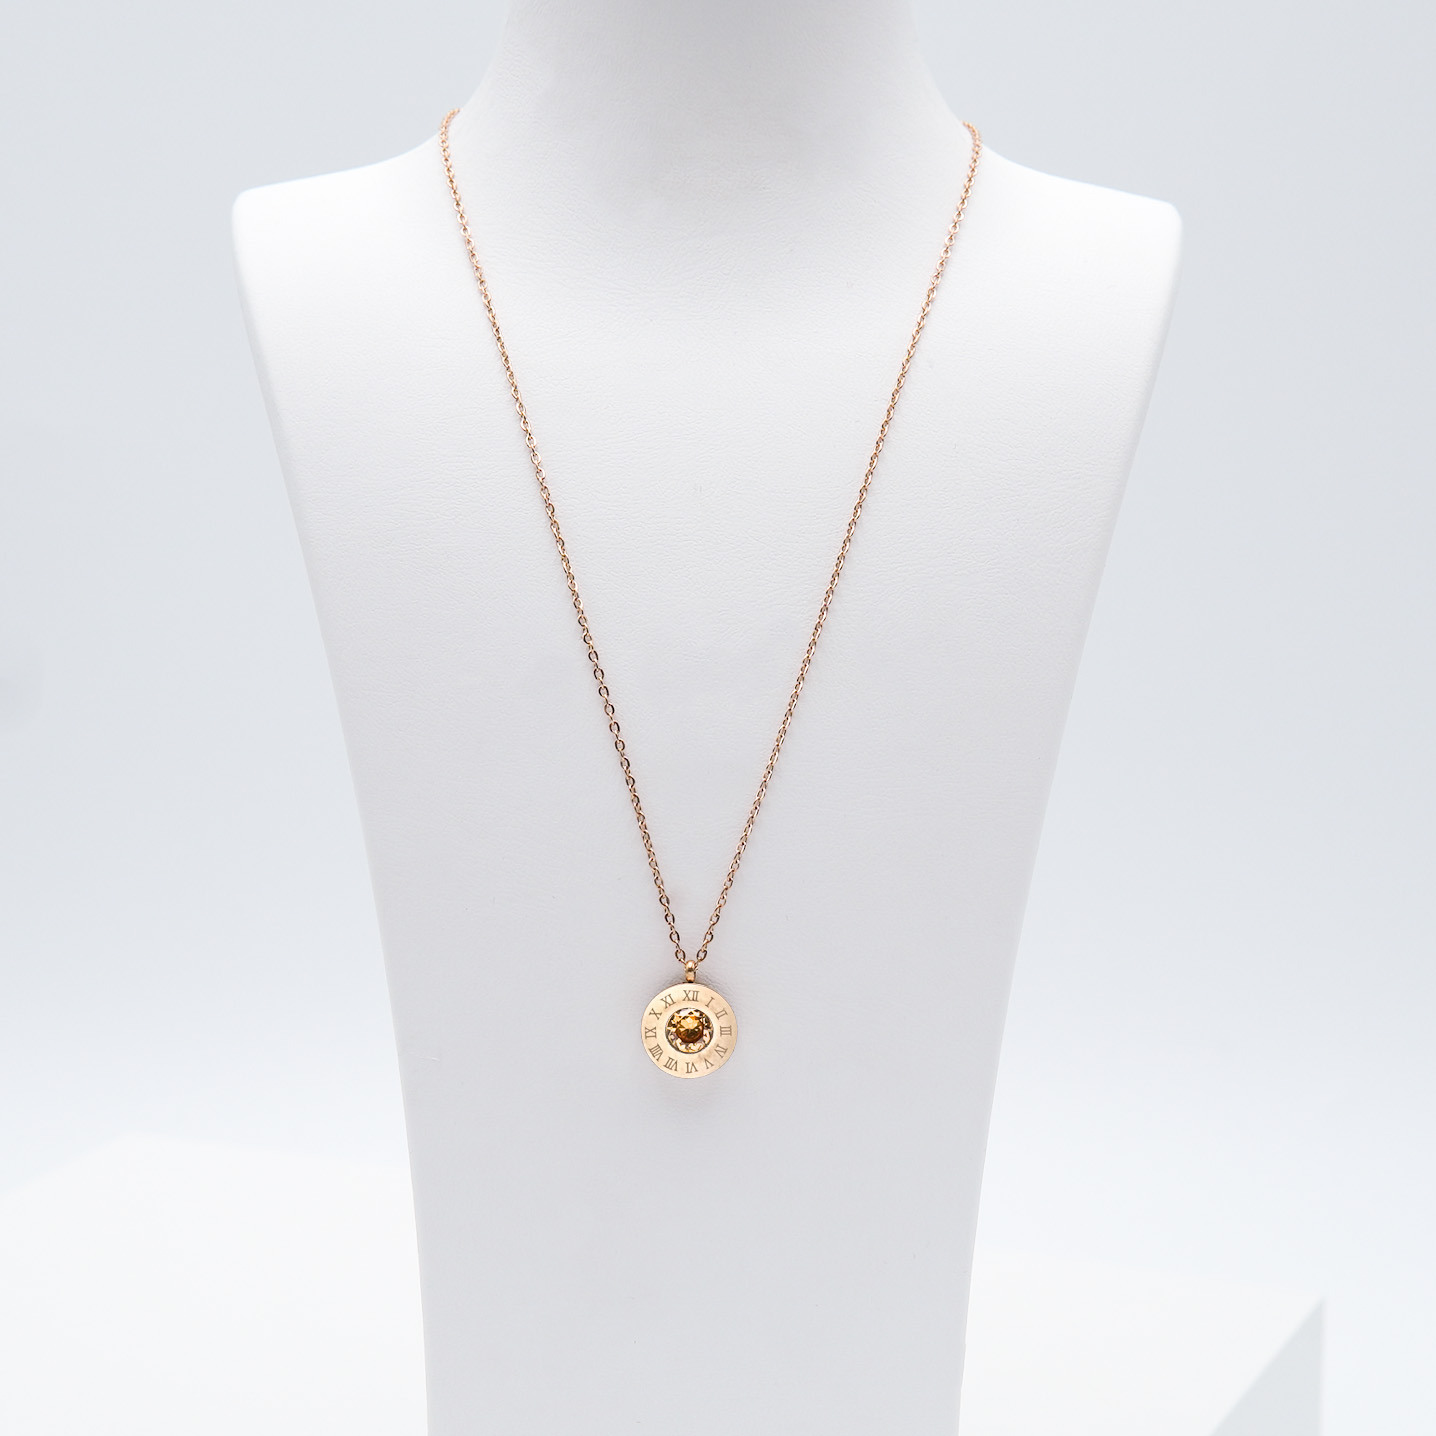 4- 4 Queen Diamonds Necklace Rose Edition Halsband Modern and trendy Necklace and women jewelry and accessories from SWEVALI fashion Sweden